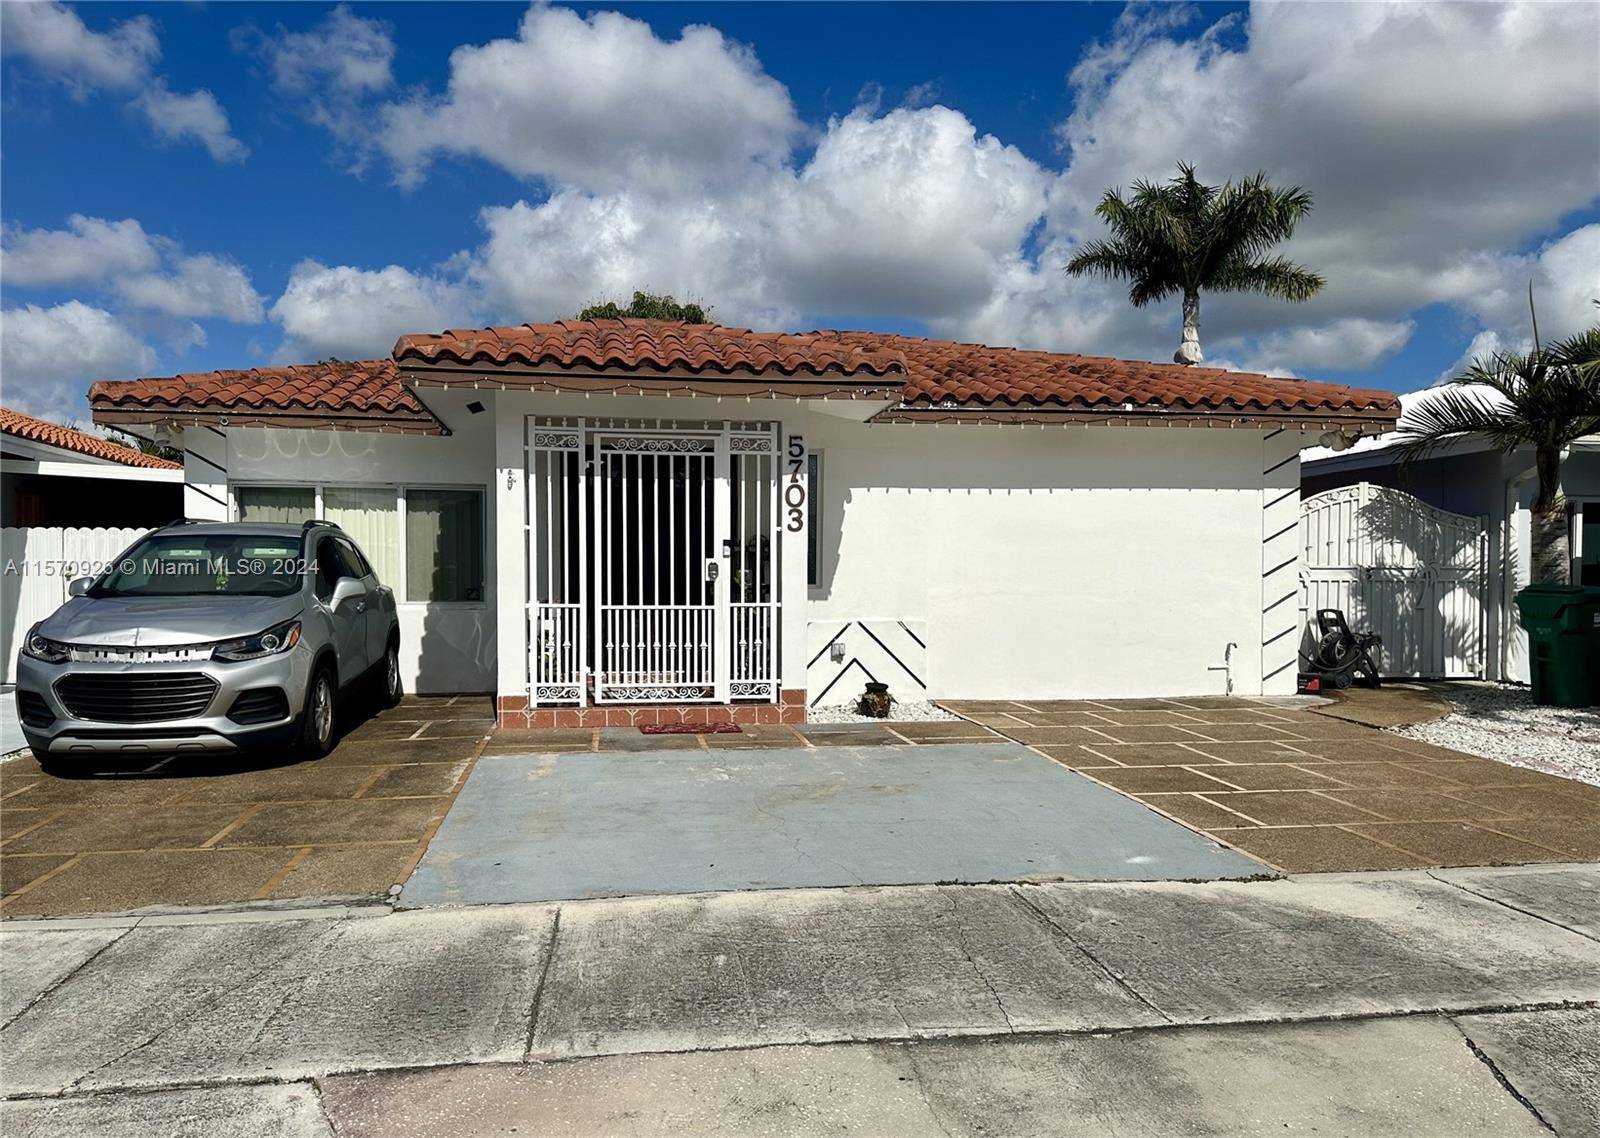 Located in the heart of Kendall in a beautiful neighborhood this single family home offers 4 bedrooms and 3 full bathrooms.